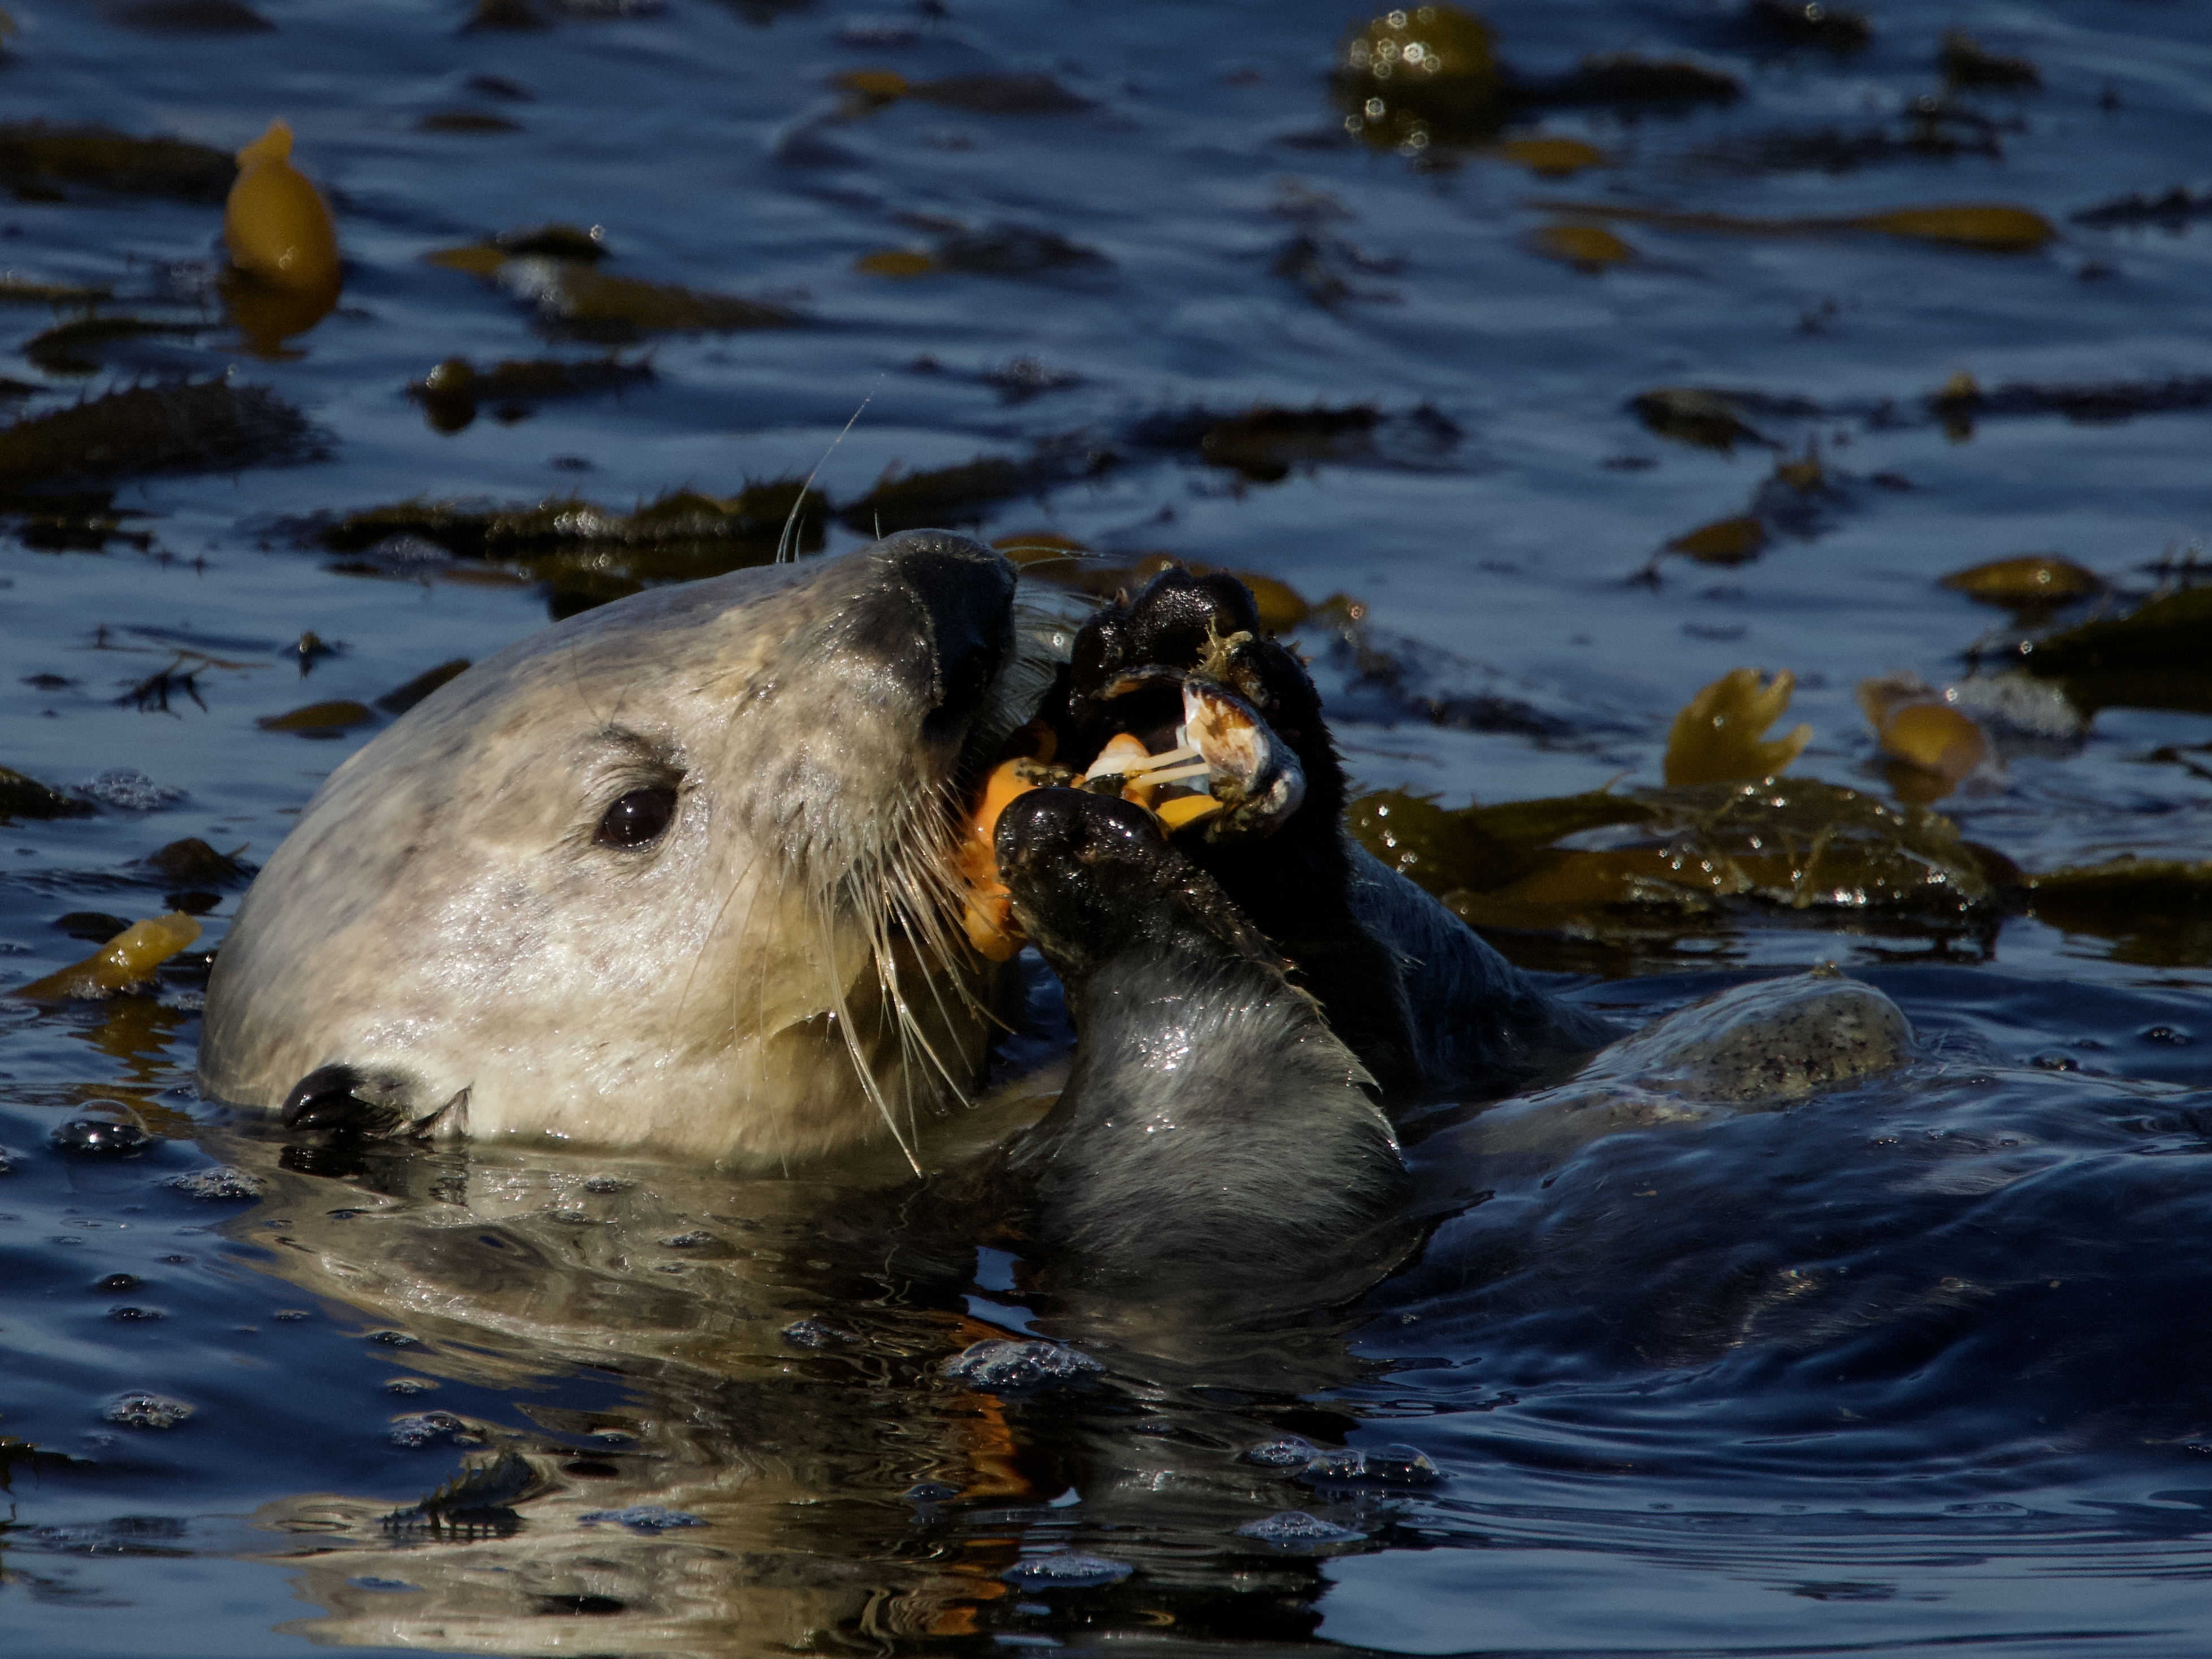 Sea Otter Eating Mussel in Monterey